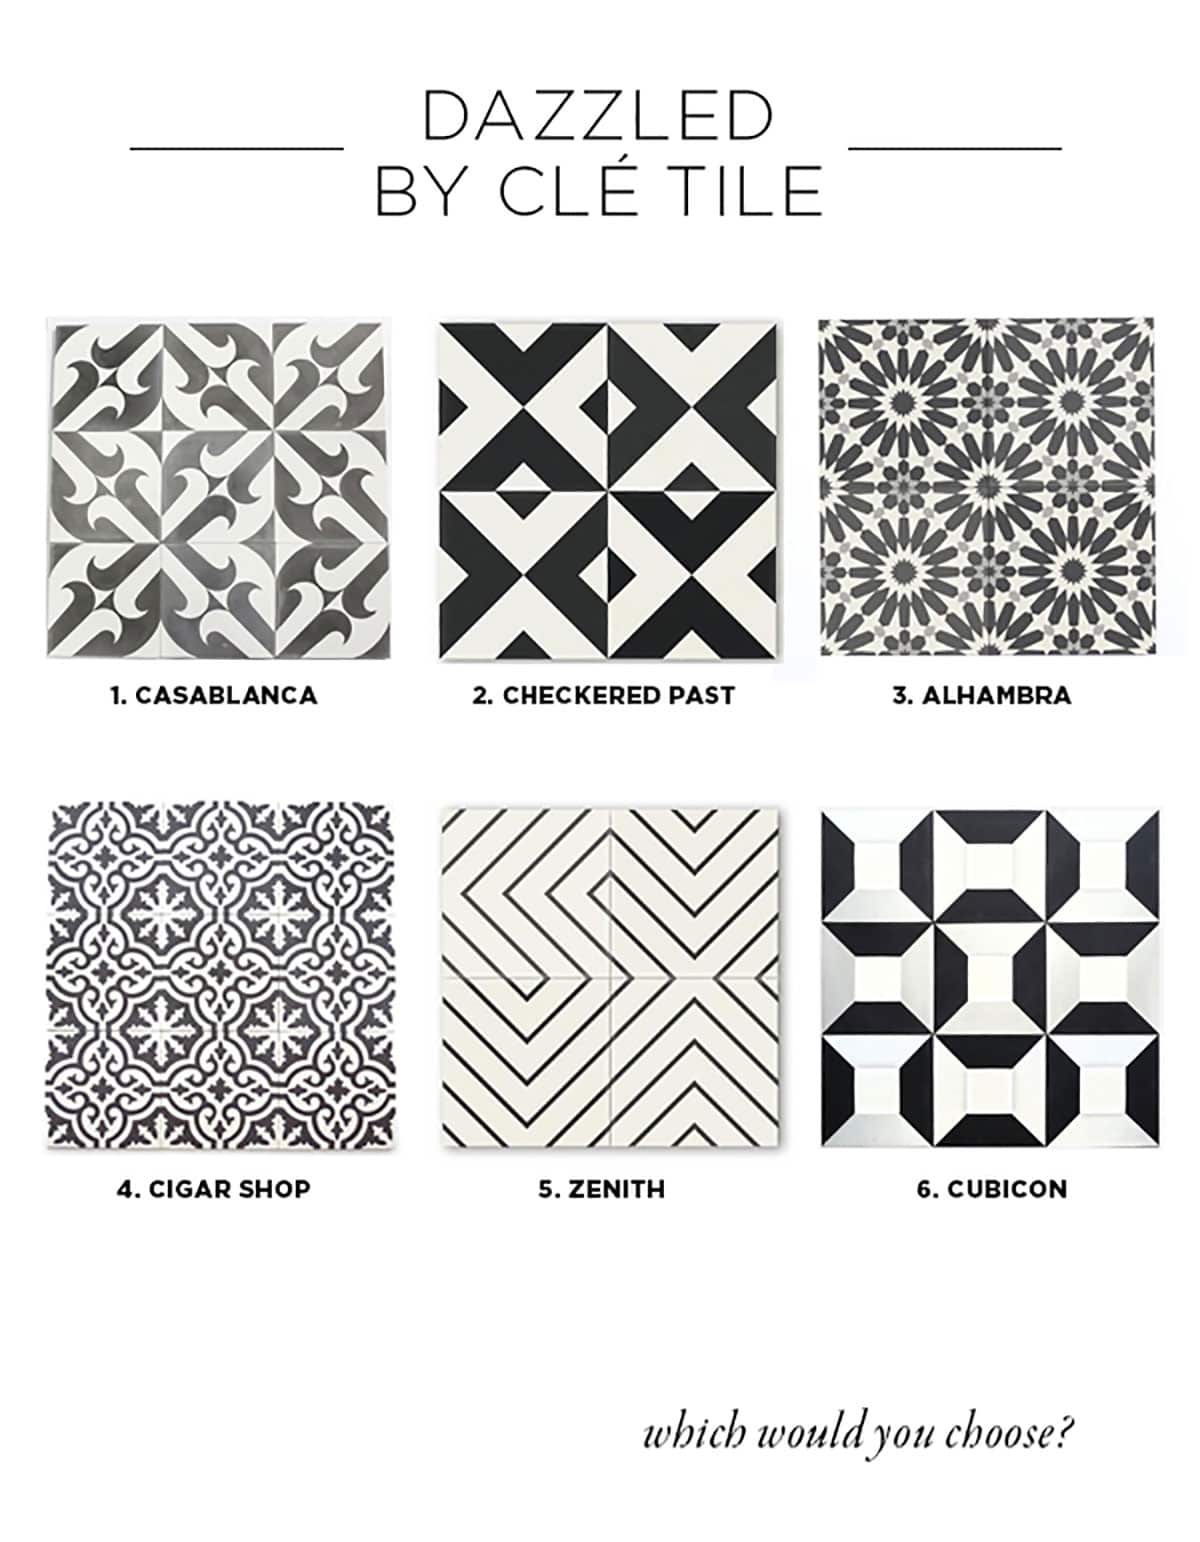 Clé Tile and House Of Hipsters have partnered up to renovate a powder room. I want this to be a truly unique powder room that is stunning. The look of a jewelry box. 